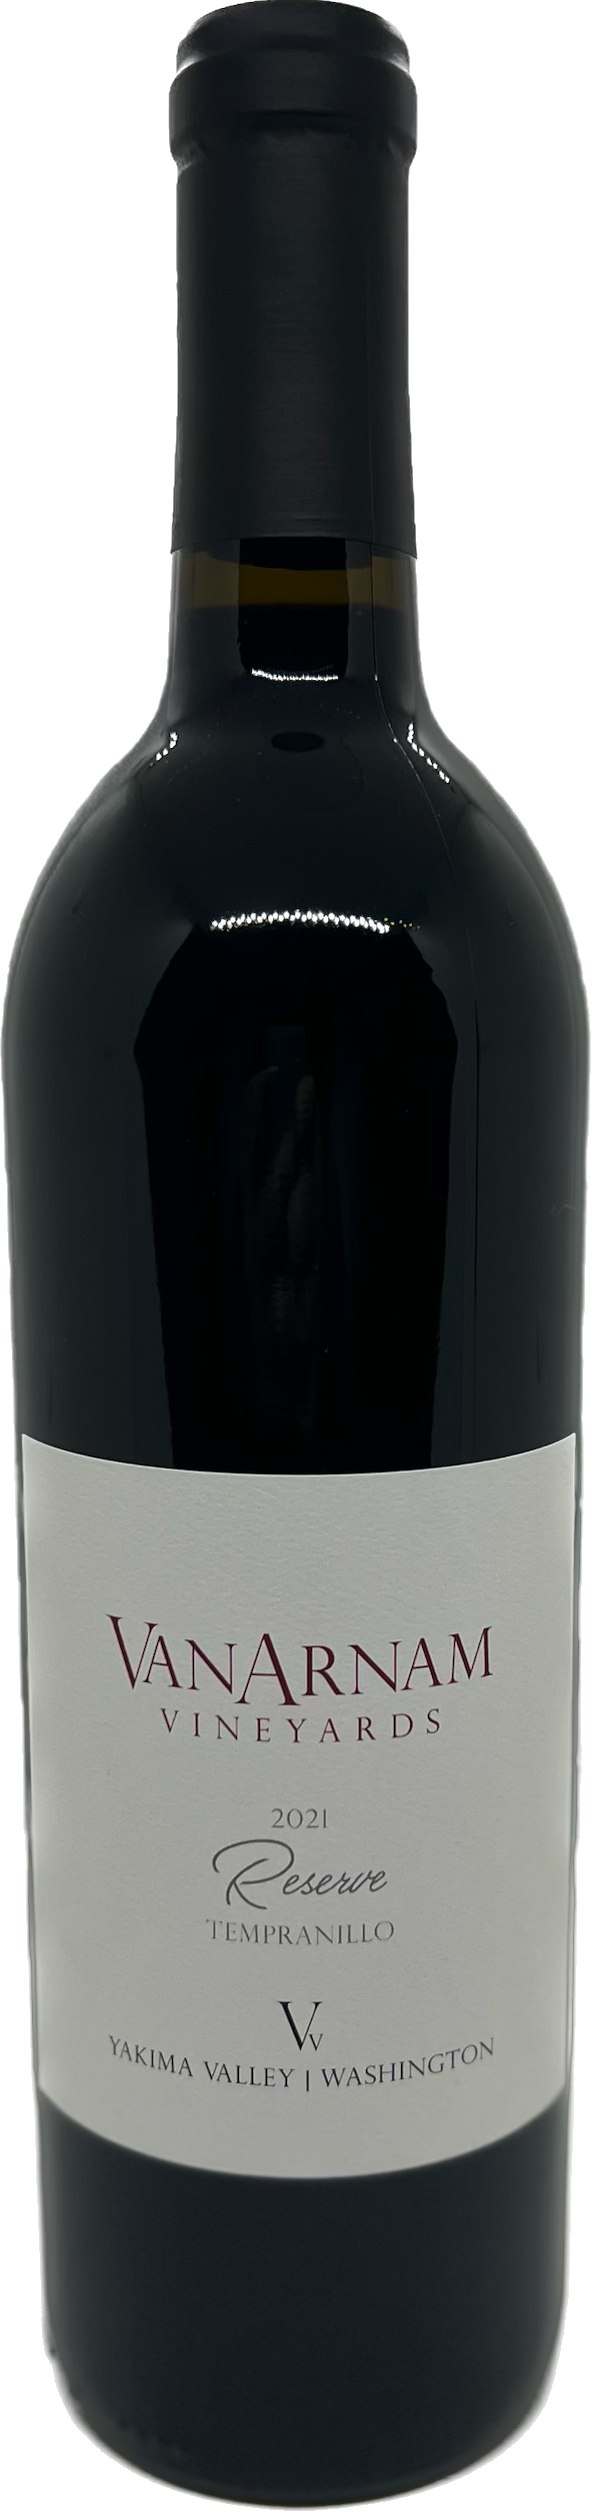 Product Image for 2021 Reserve Tempranillo